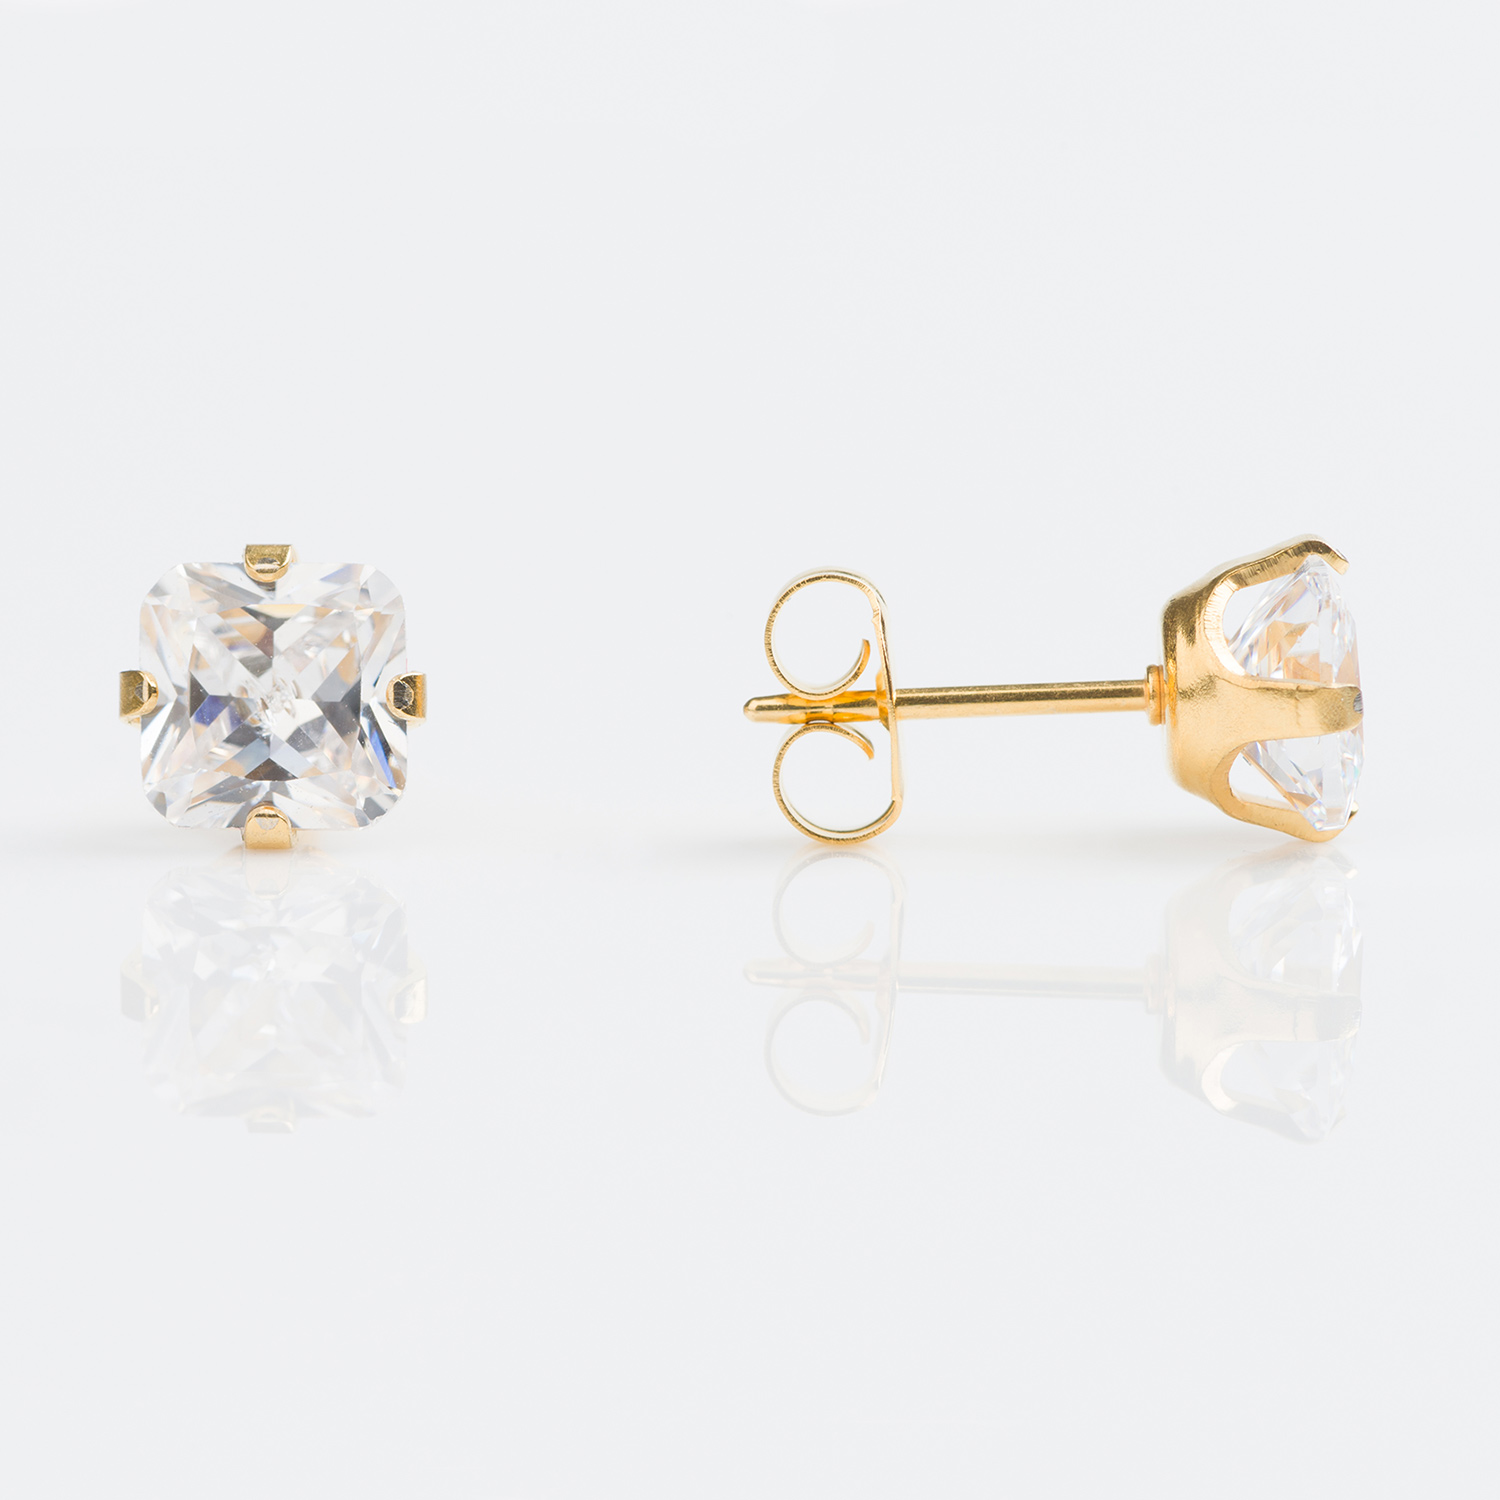 S6400STX – Studex Sensitive Gold Plated 6mm Cubic Zirconia Earrings